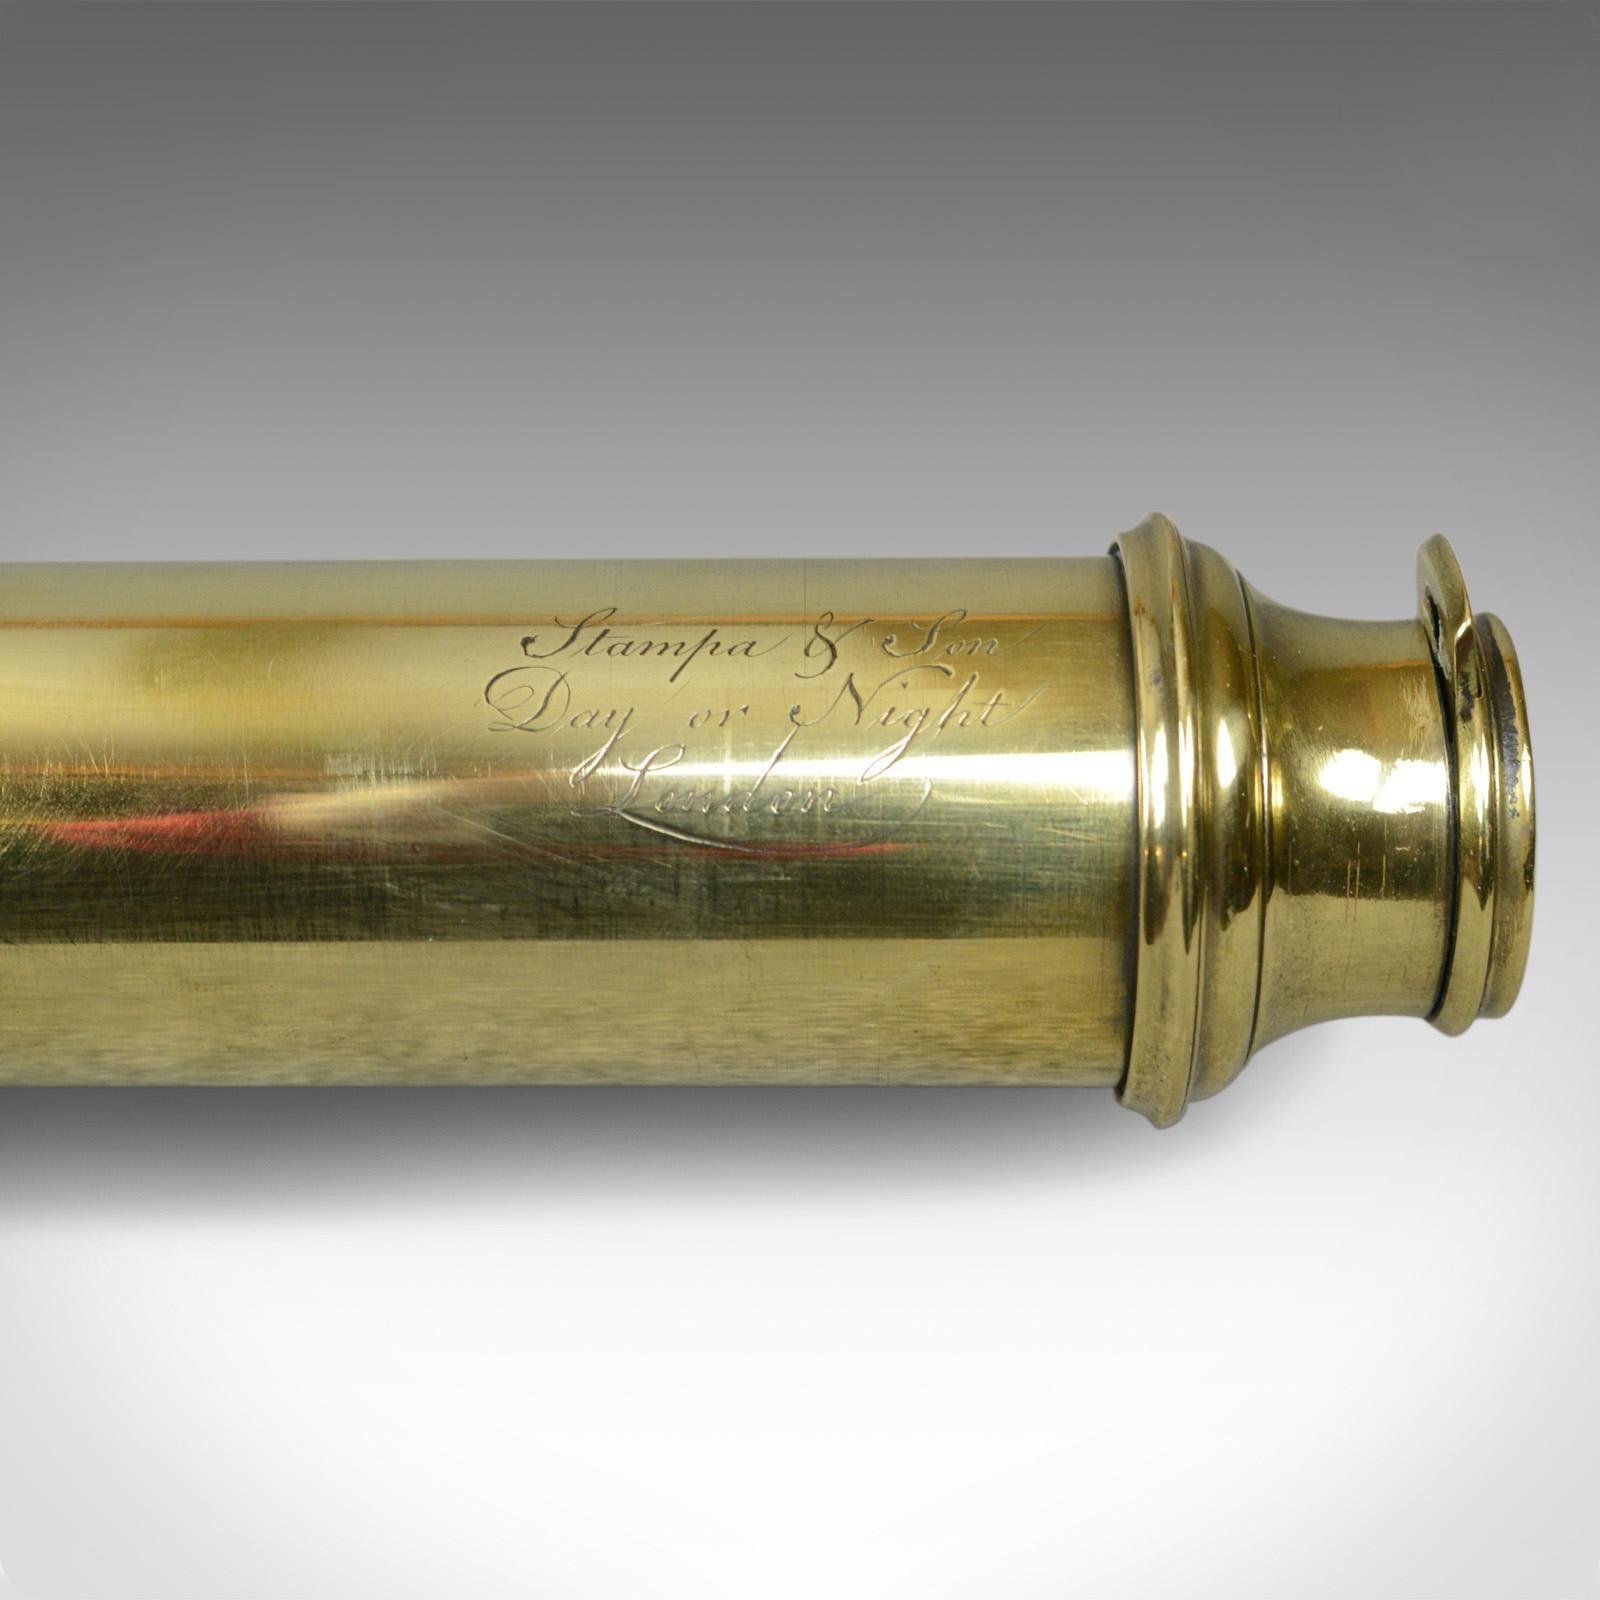 19th Century Antique Telescope, Two Draw, Refractor, Stampa and Son, London, circa 1810